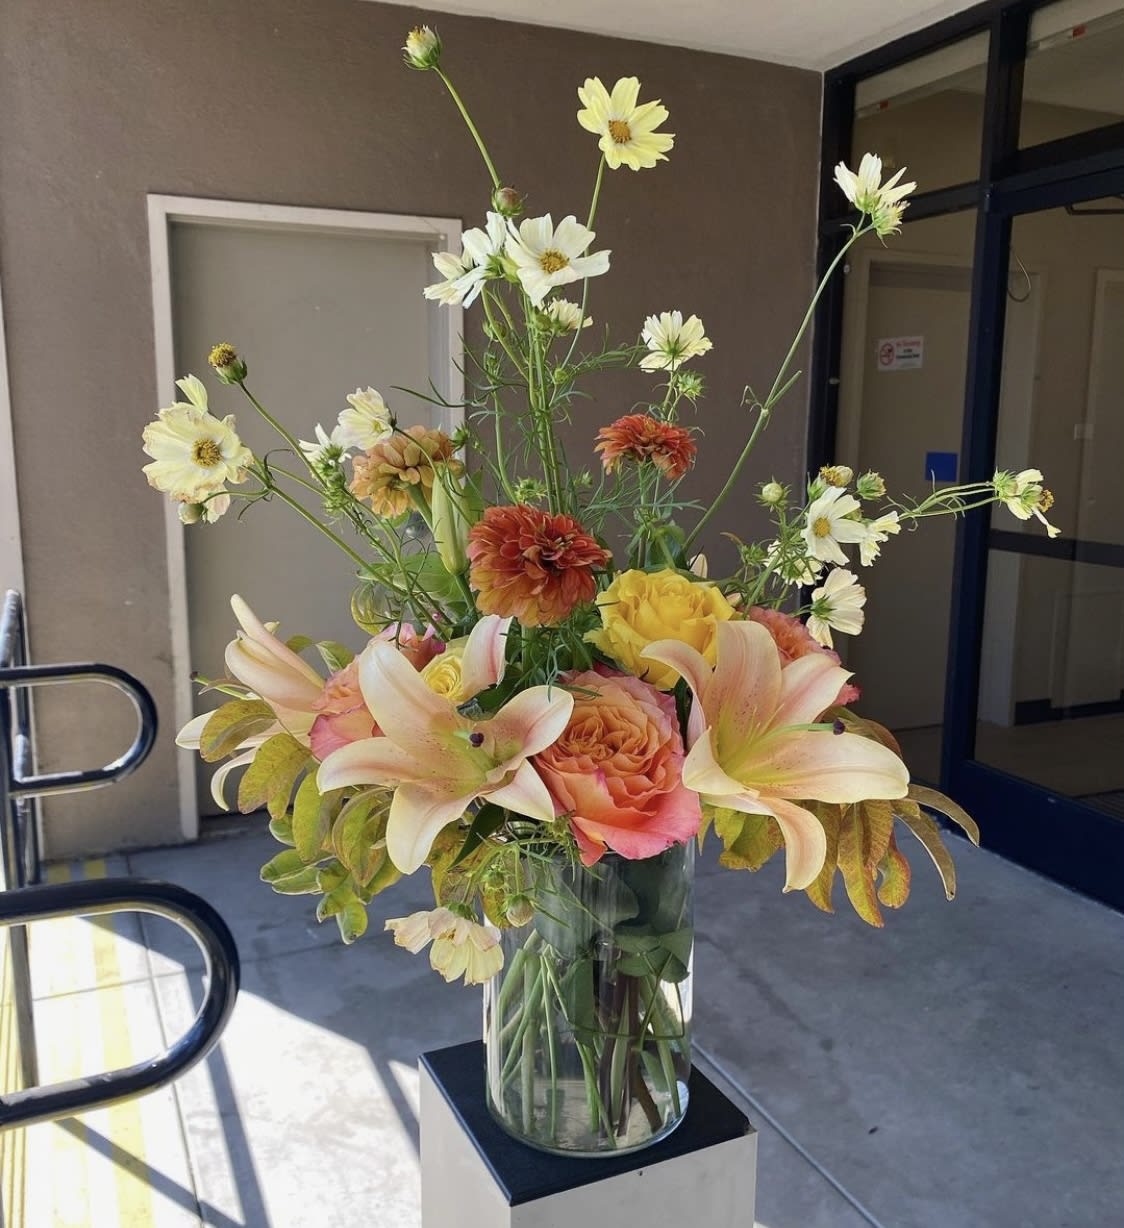 Fall into Summer - Celebrate Summer with this arrangement featuring zinnias, lilies, cosmos, and pistachio leaves. Comes in a clear glass vase.